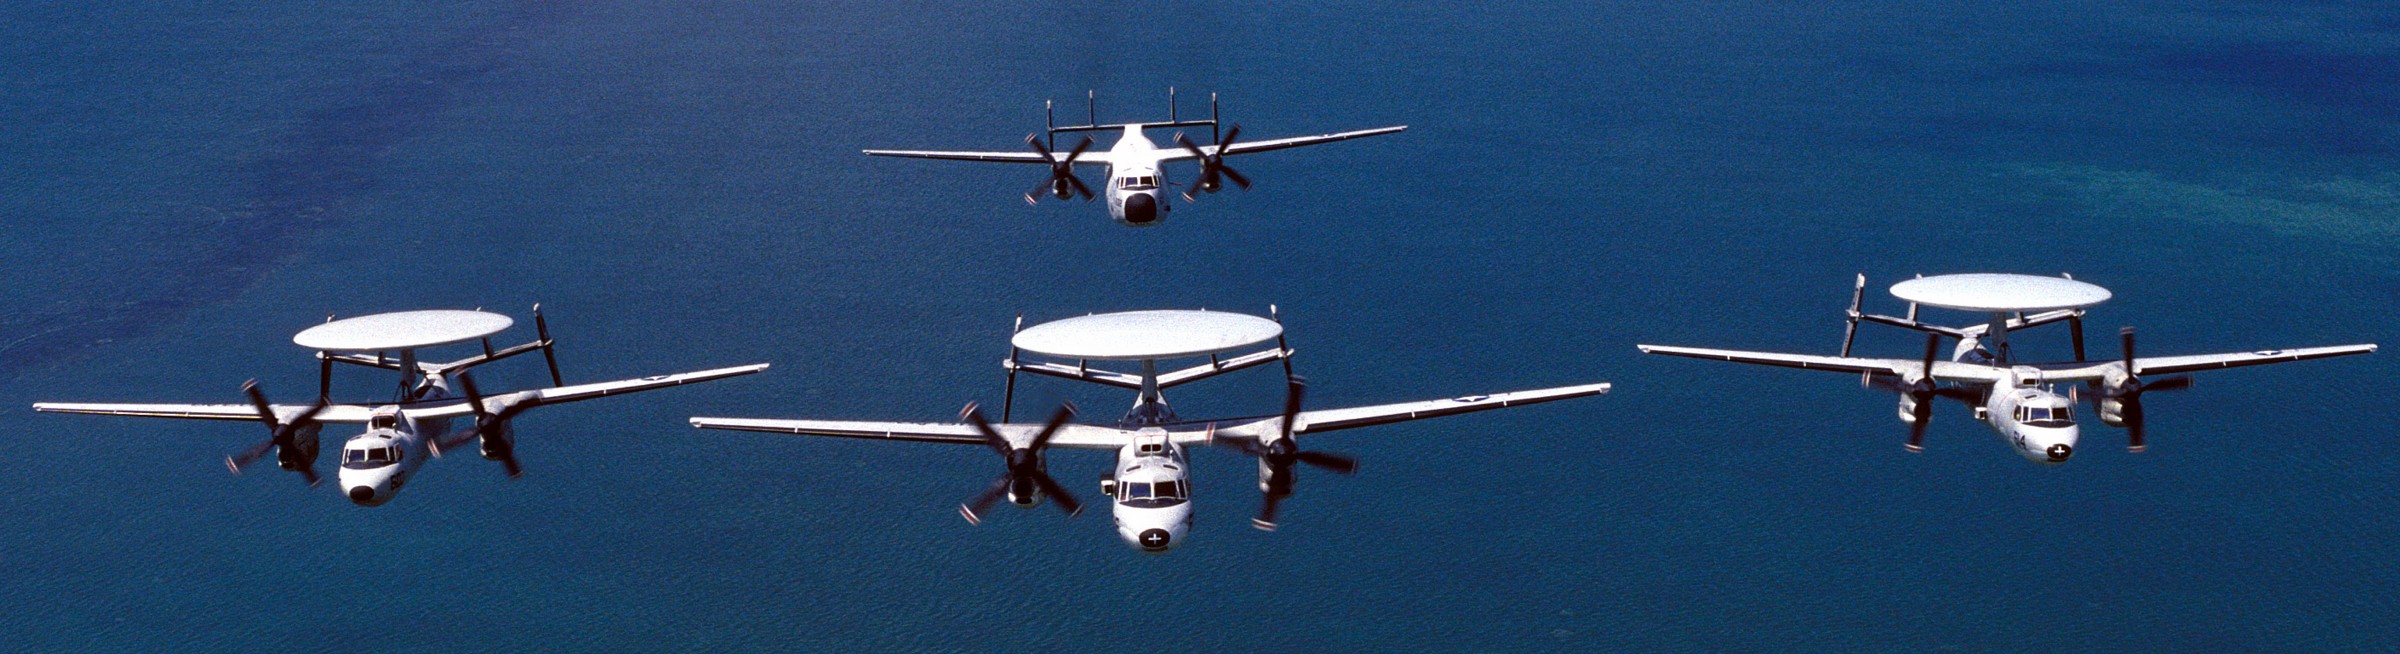 vaw-120 greyhawks carrier airborne early warning squadron e-2c hawkeye replacement frs 117